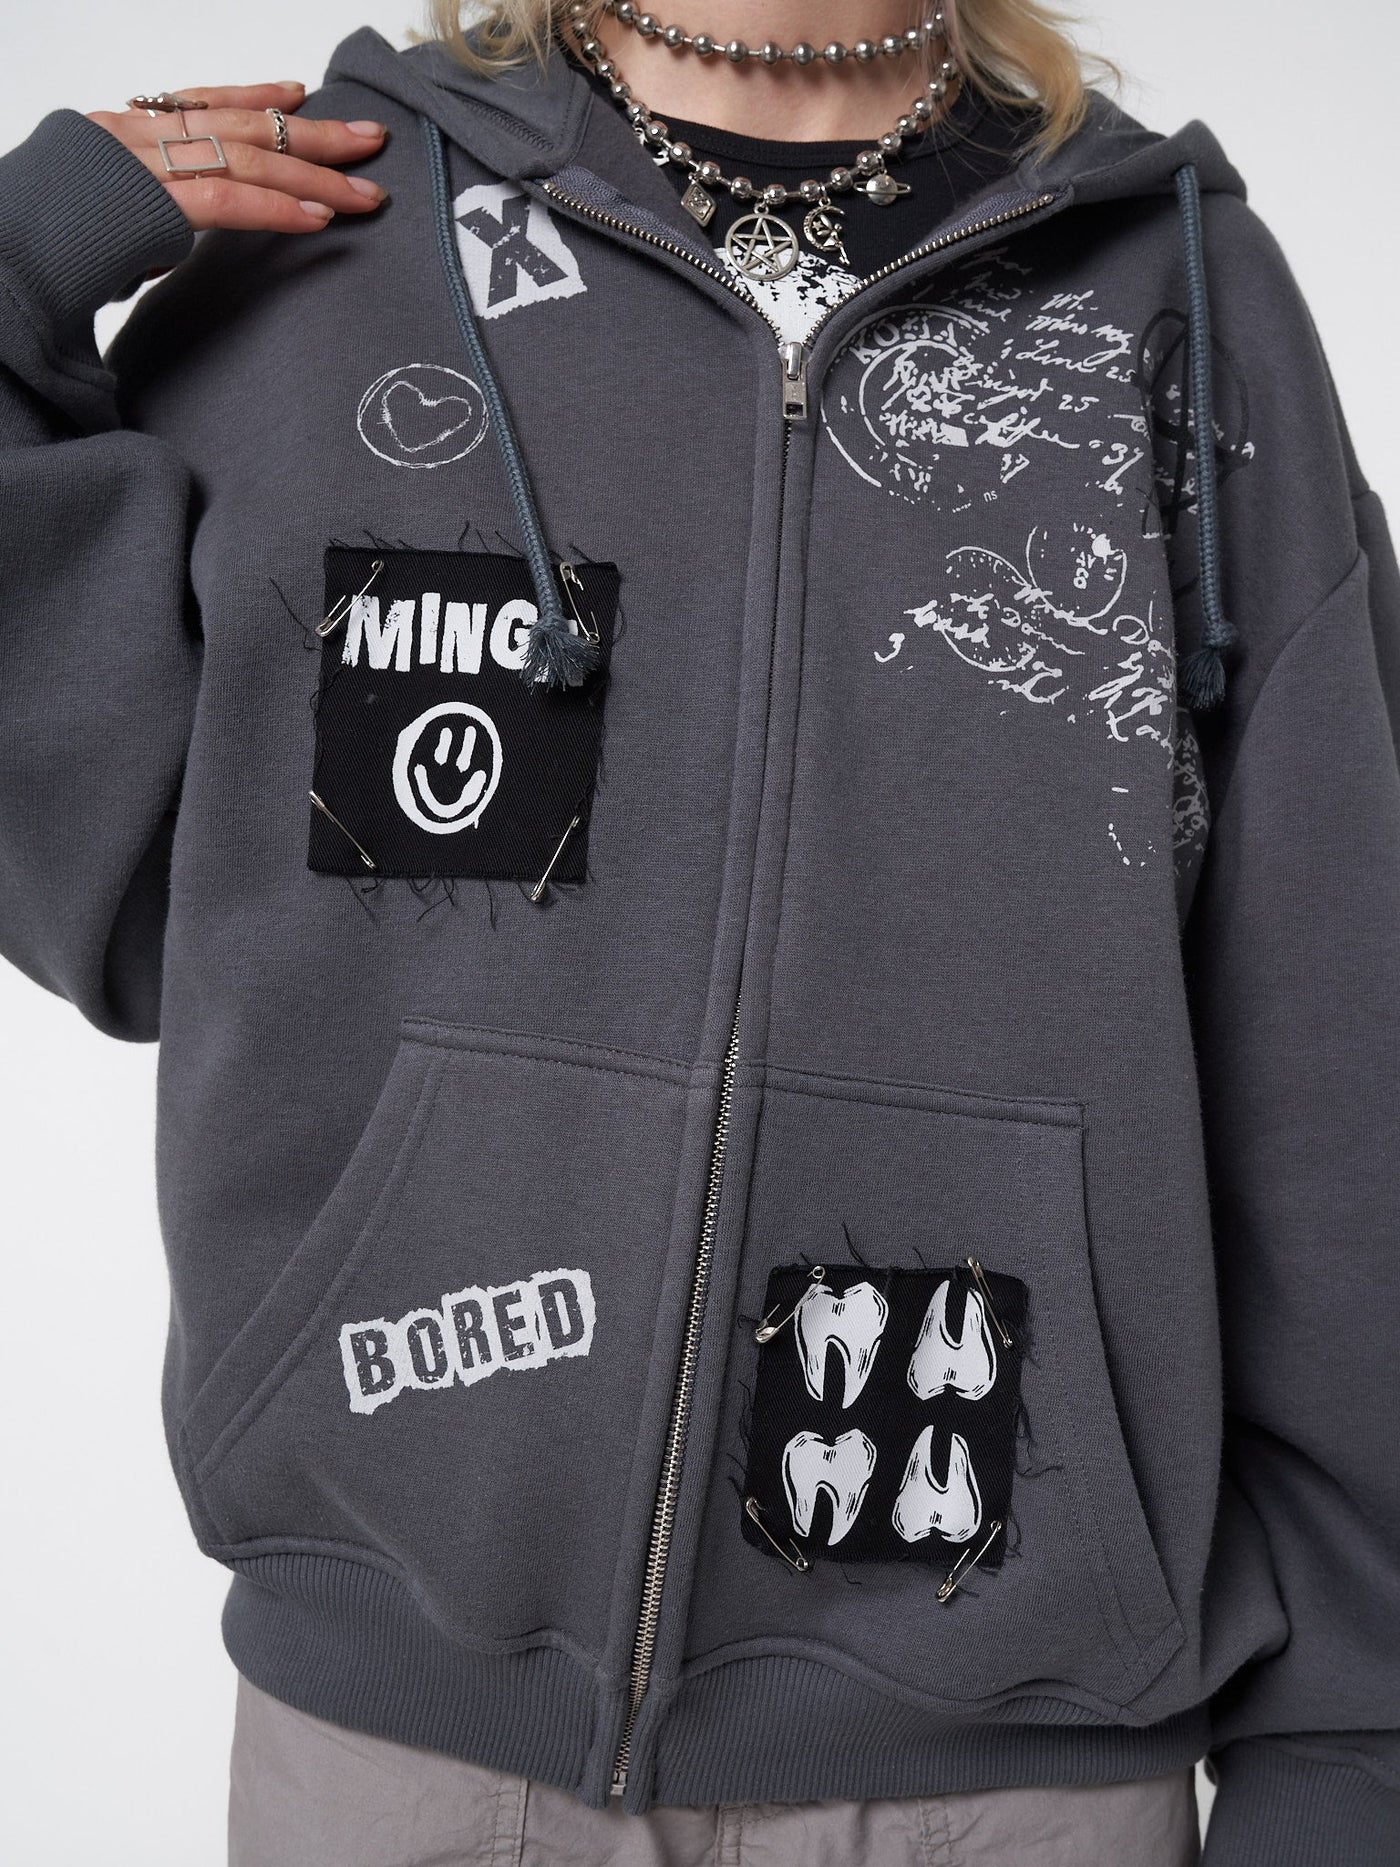 Zip up hoodie jacket in grey with front prints, patches and safety pins